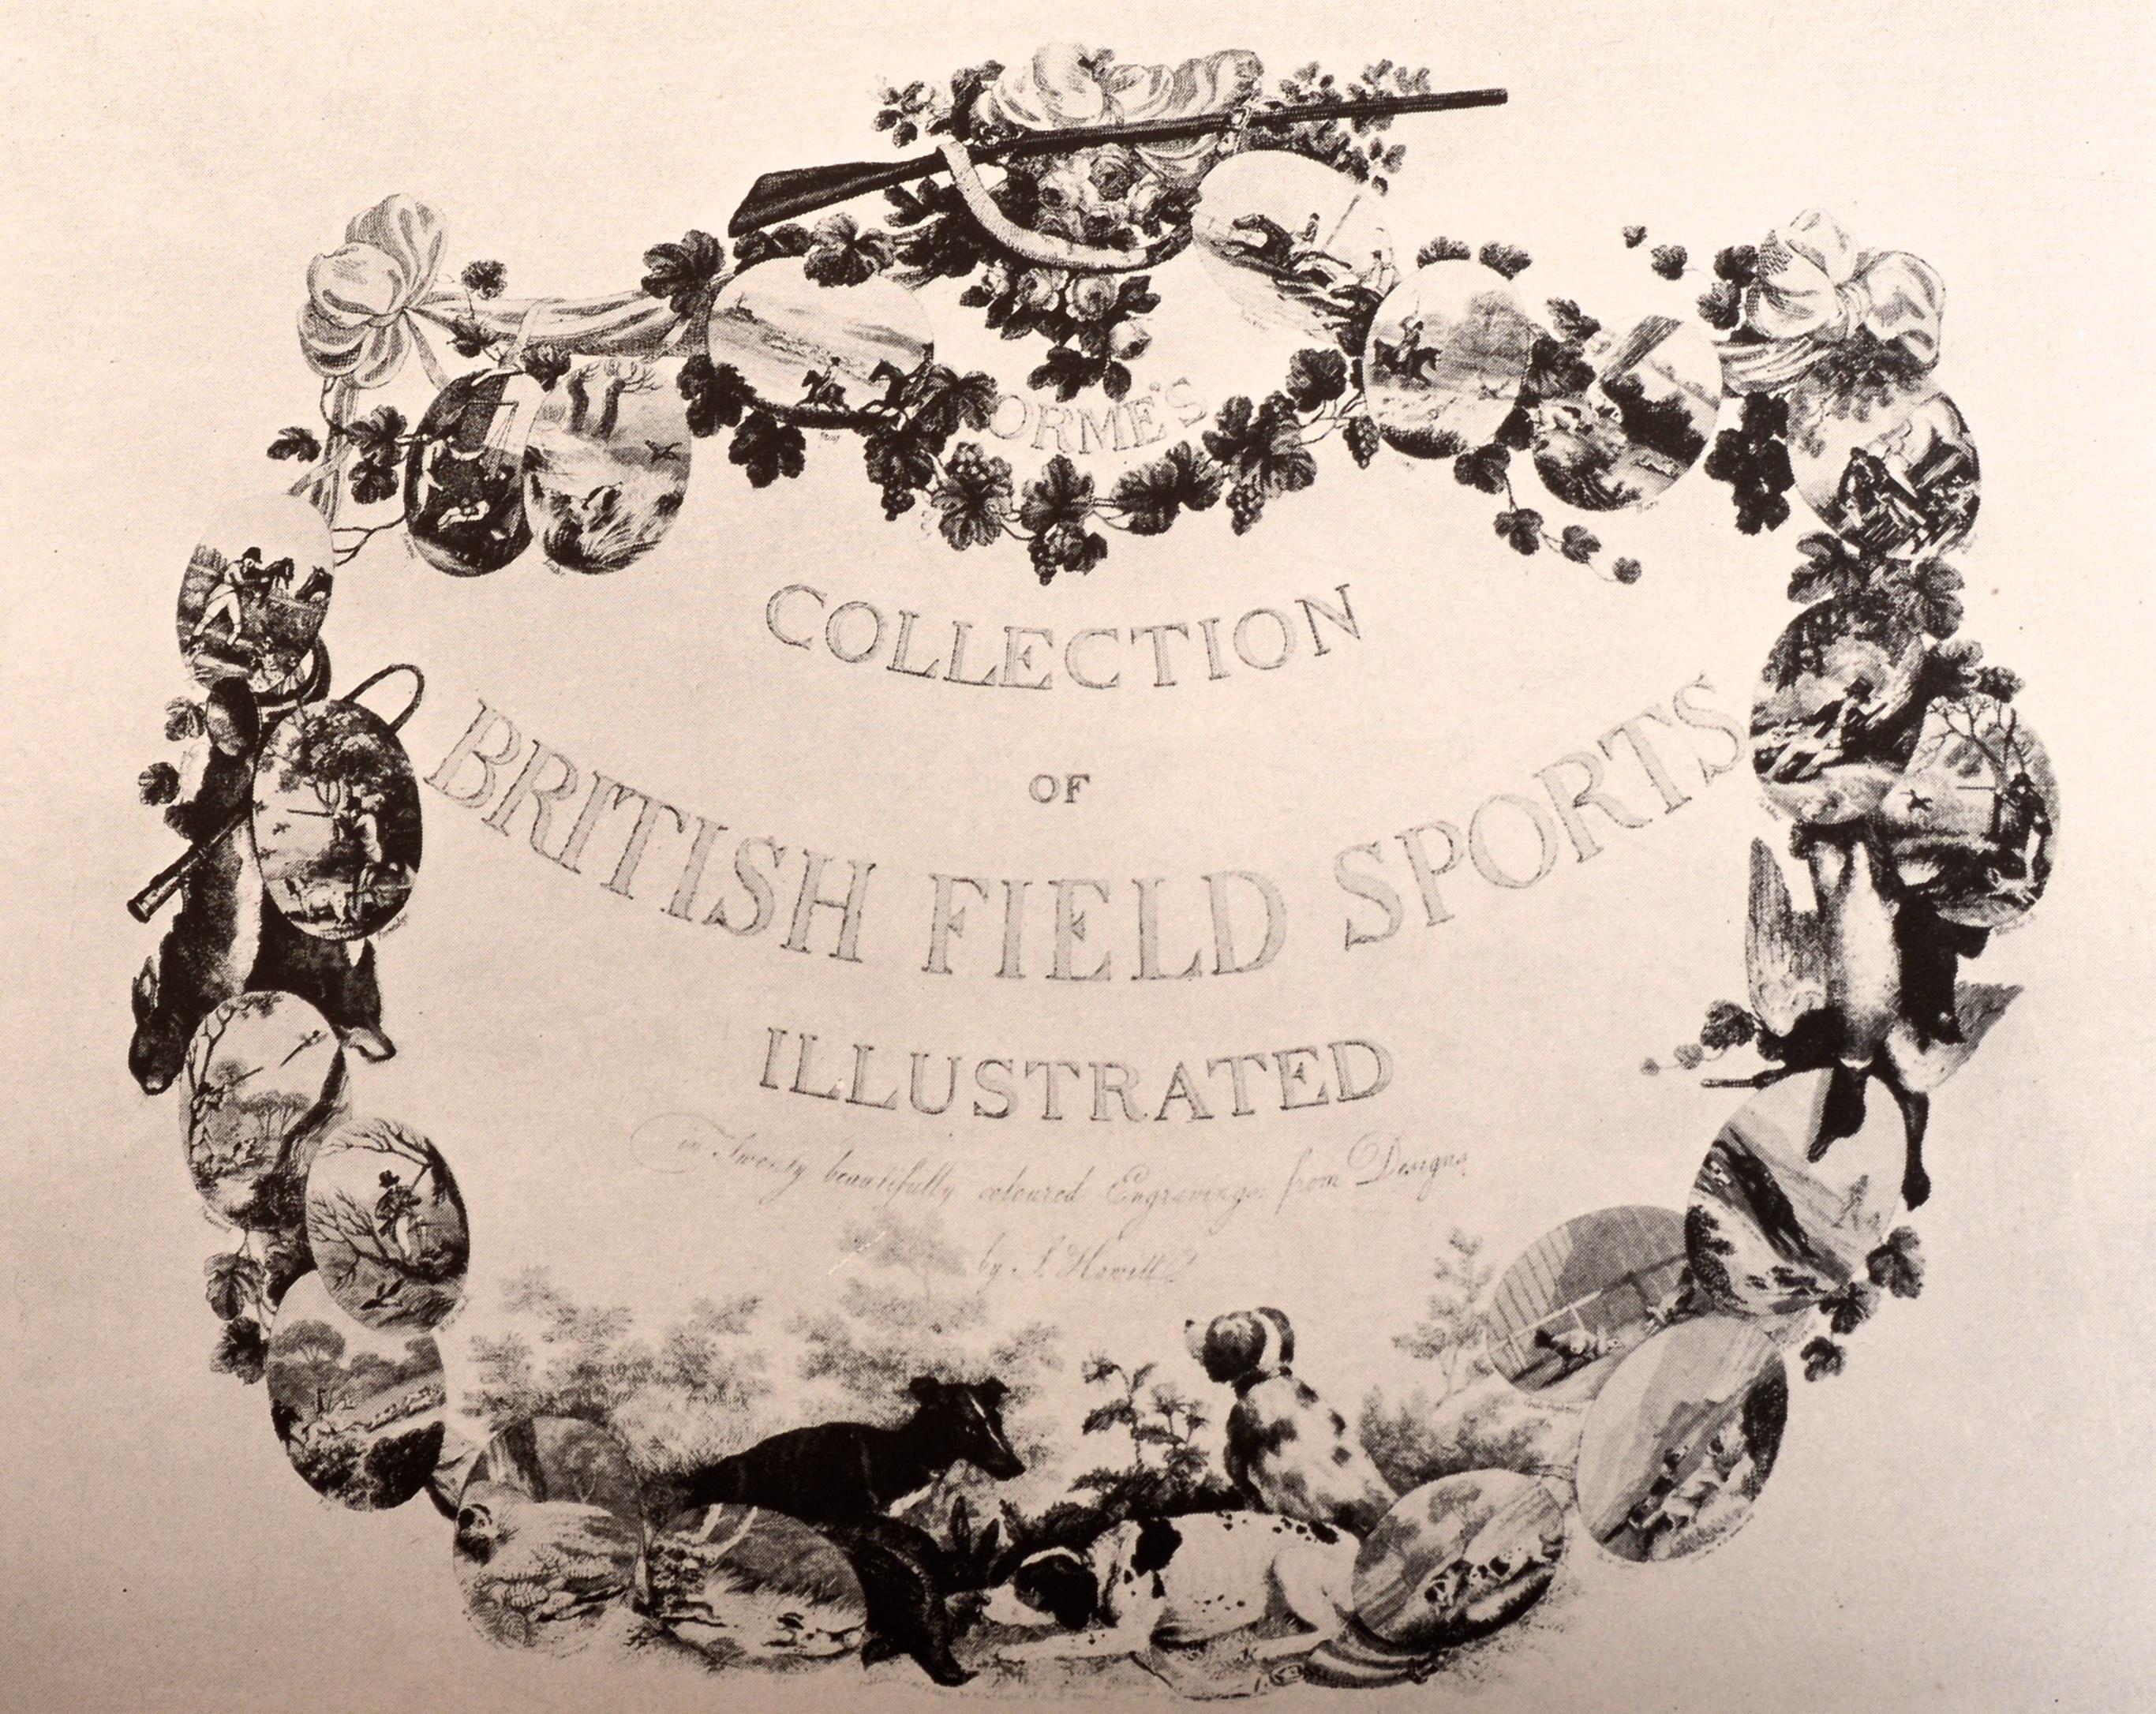 The Renowned Collections of Sporting and Colored Plate Books Illustrated by Alken, Pollard, Malton, and Other Famous Artists, Including Orme's British Field Sports and The Microcosm of London, both in the original parts, Together with Library Sets